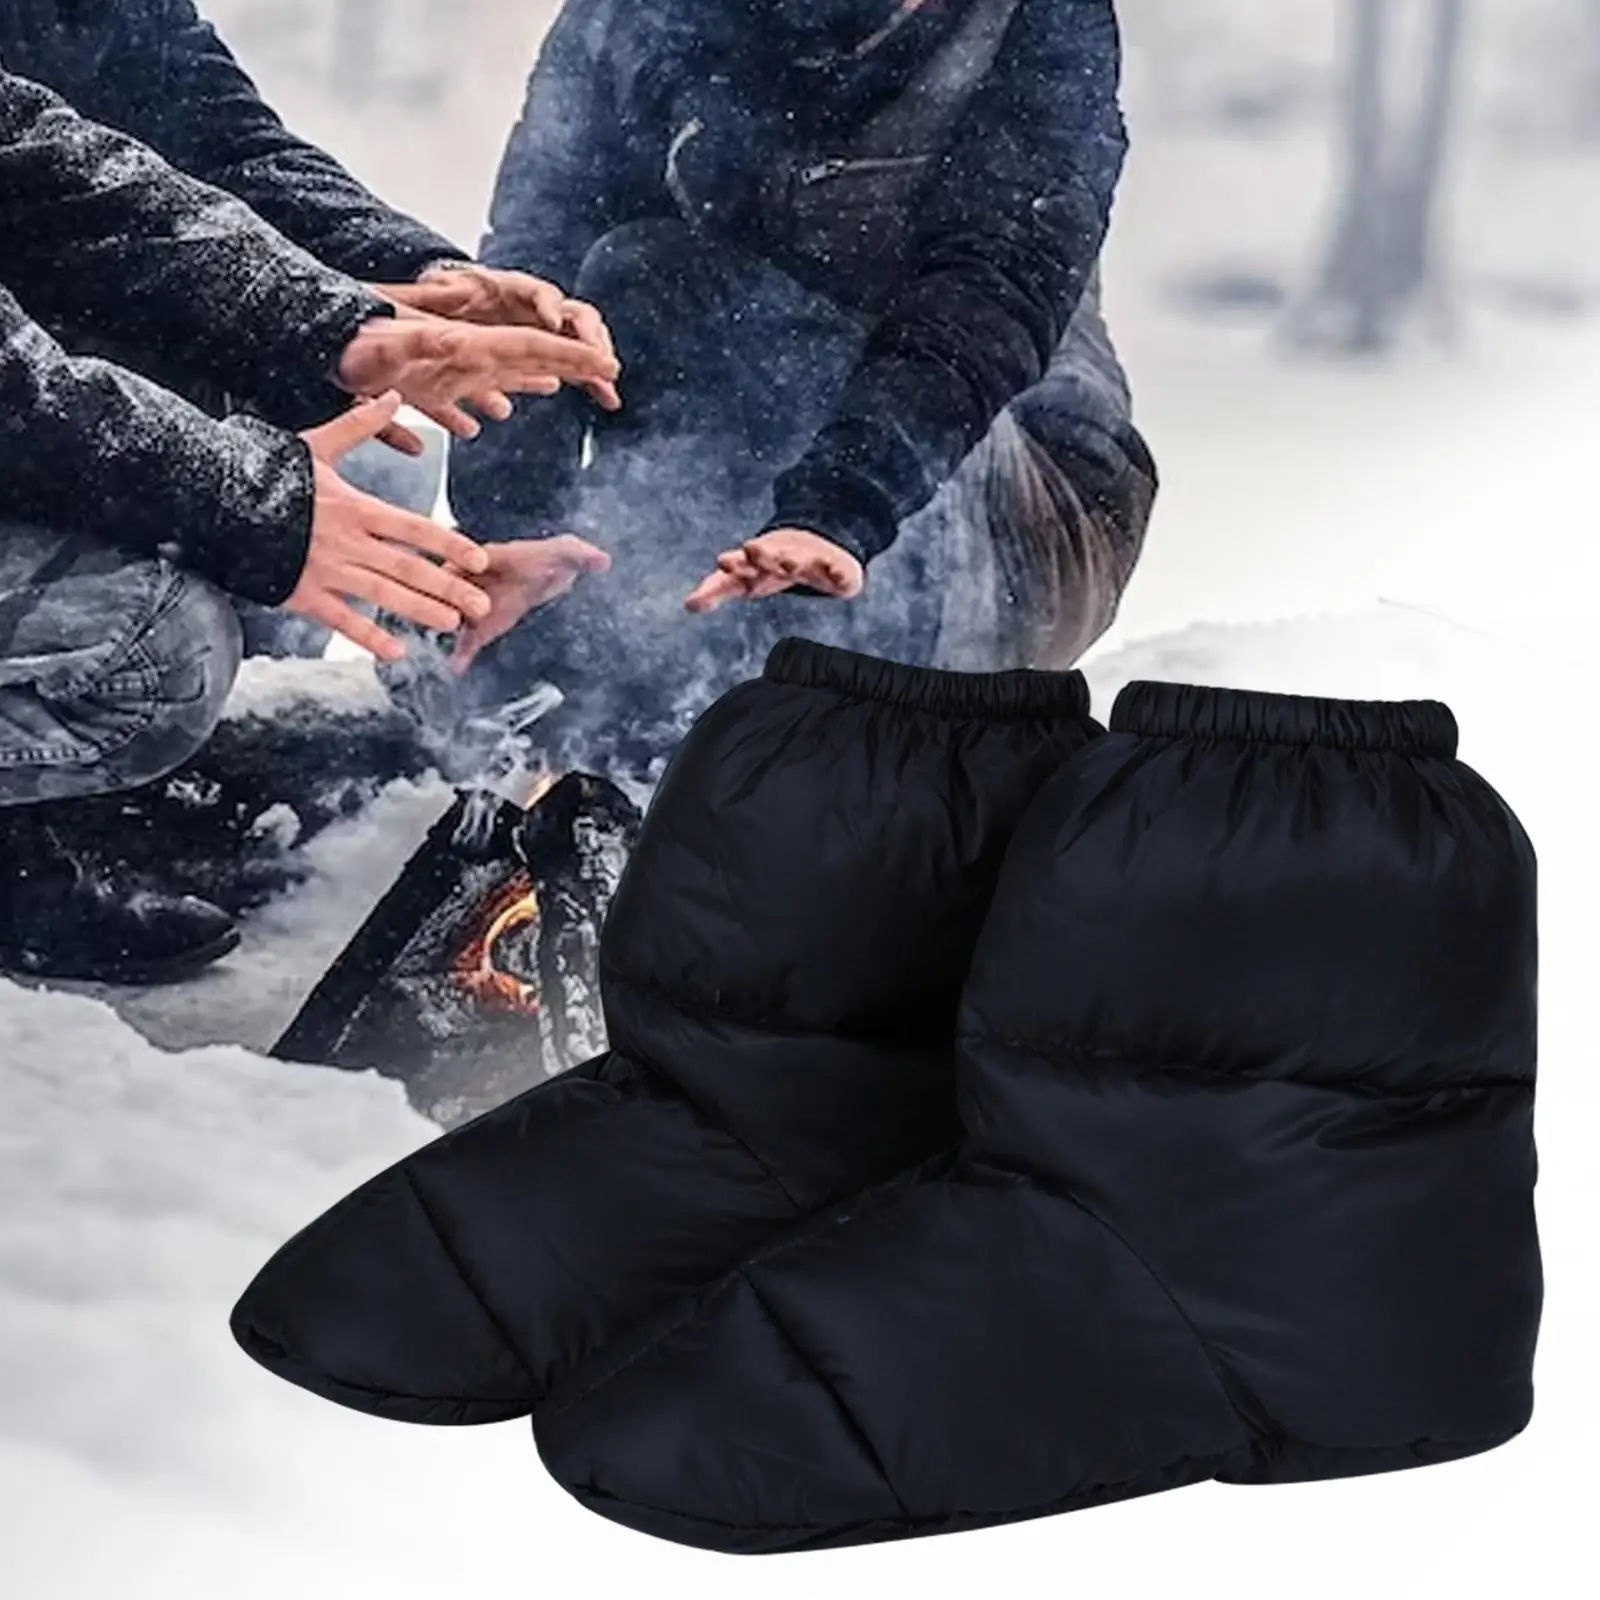 Winter Down Slippers Warm Bootie Shoes Cozy Women Men Keep Warm Soft Feet Cover Socks for Skiing Hiking Outdoor Fishing Indoor